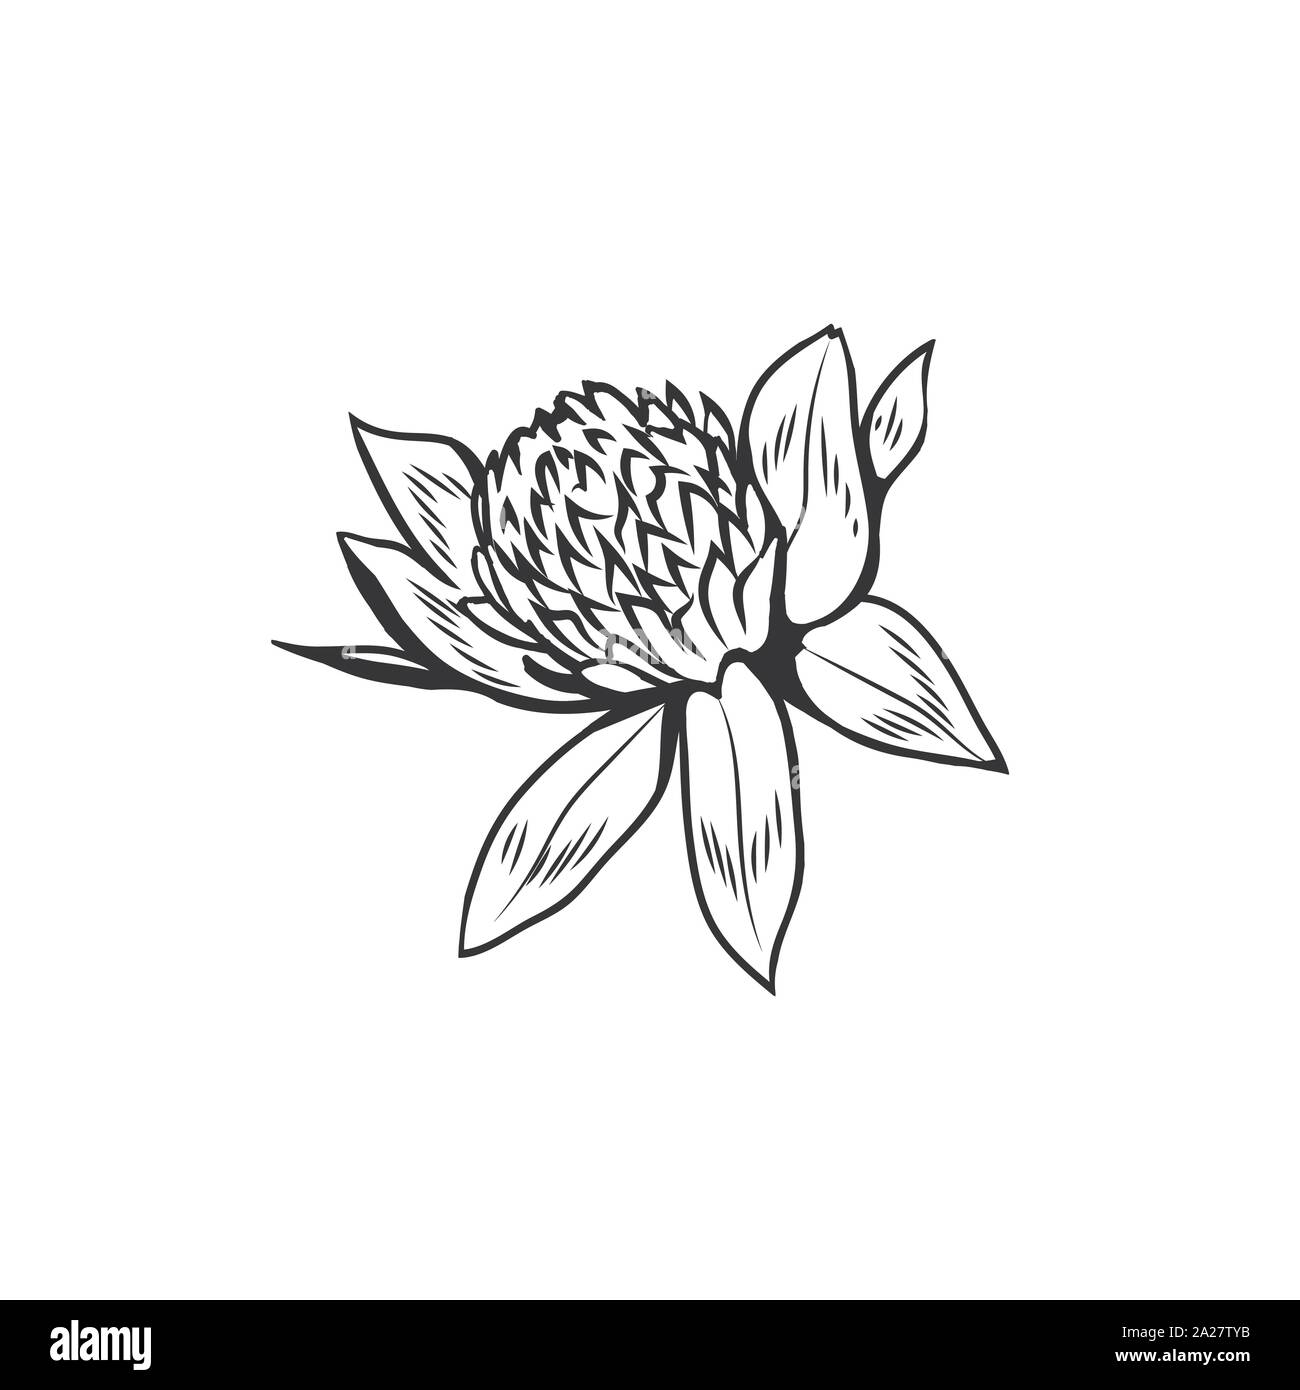 Clover flowers black and white illustration. Blooming honey plant with title Trefoil. Irish shamrock, floral luck symbol with three leaves. Botanical outlines sketch. Postcard design element Stock Vector